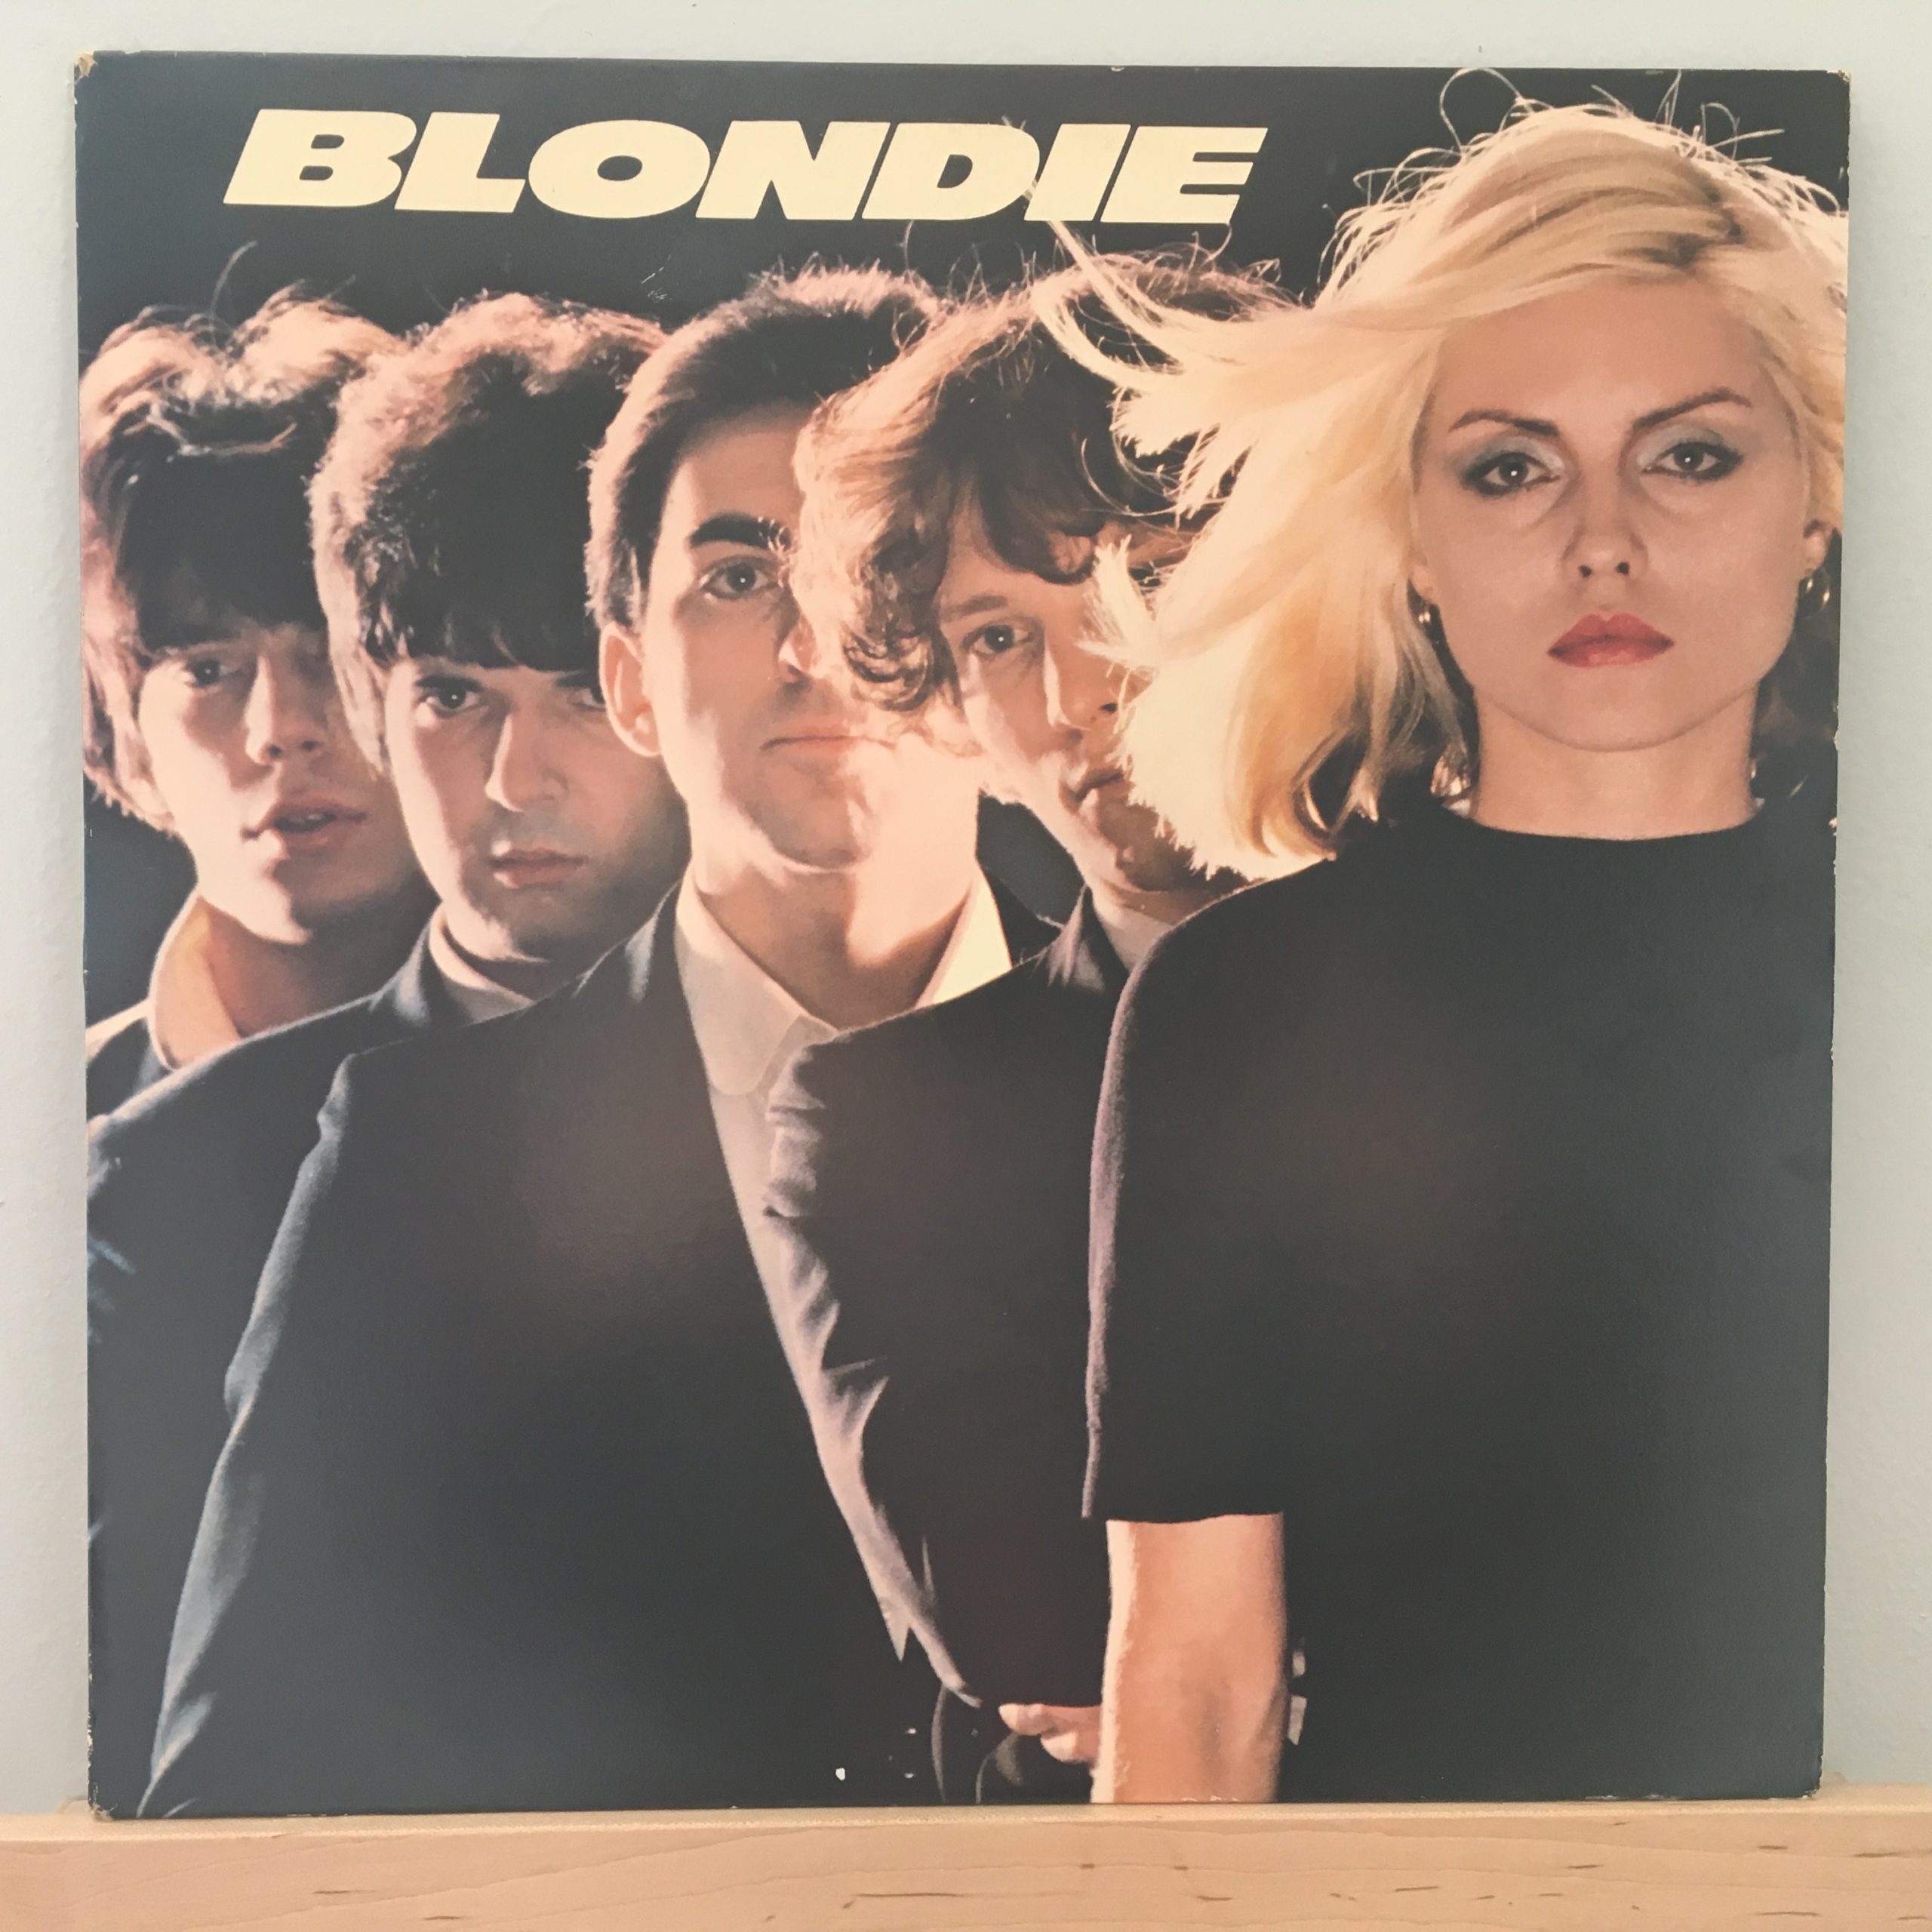 Blondie front cover